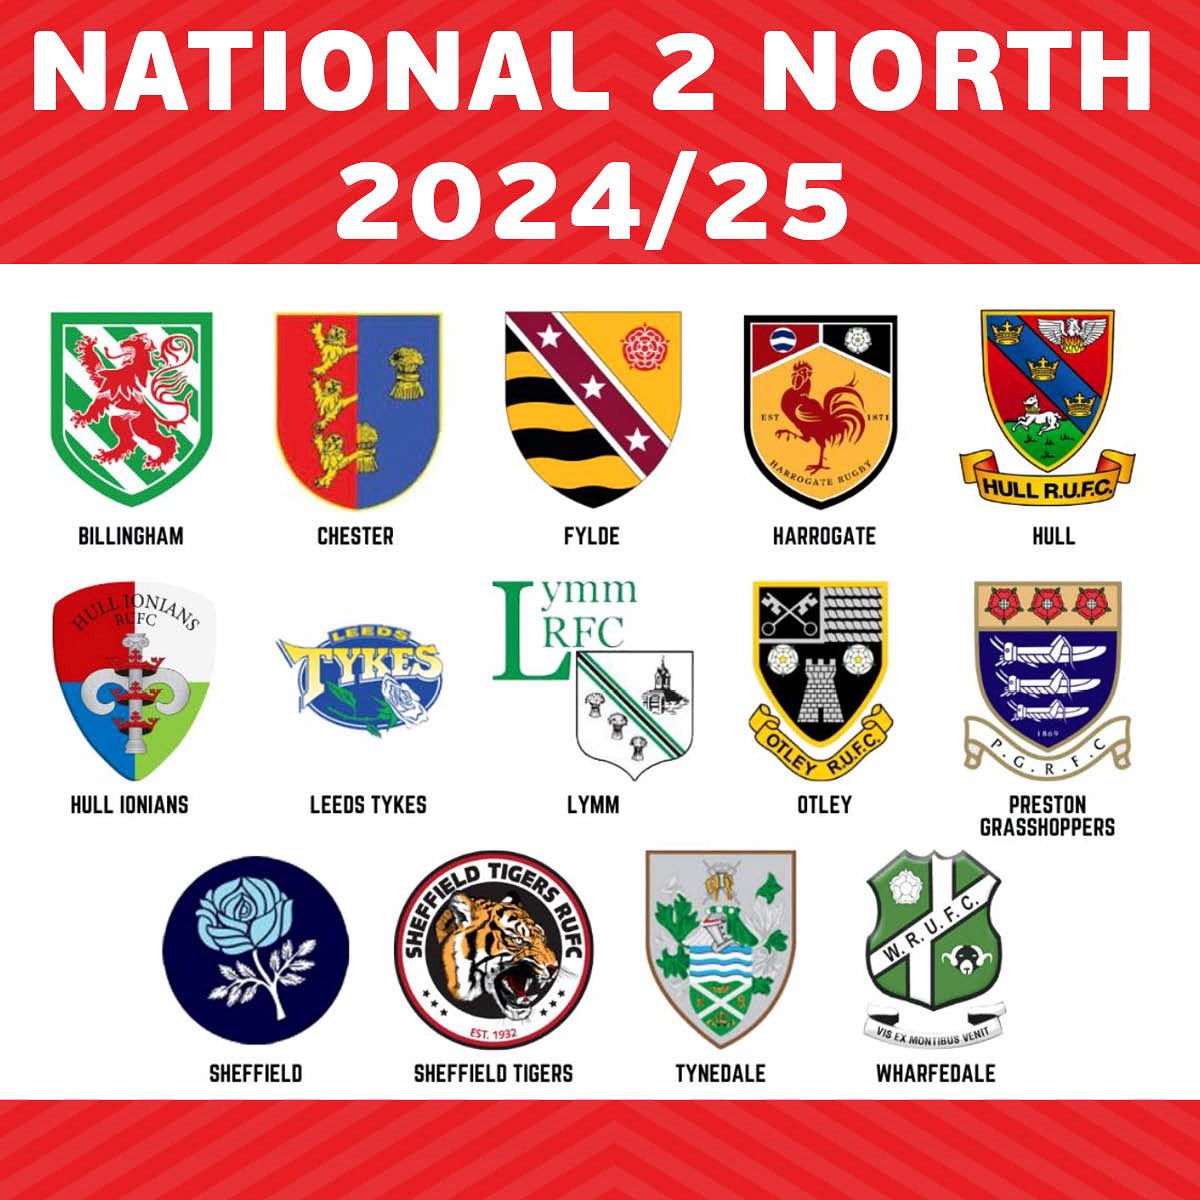 We’re pleased to announce that the RFU have confirmed that we will be in National 2 North for the 2024/25 season 🙌🏻 #upthechess